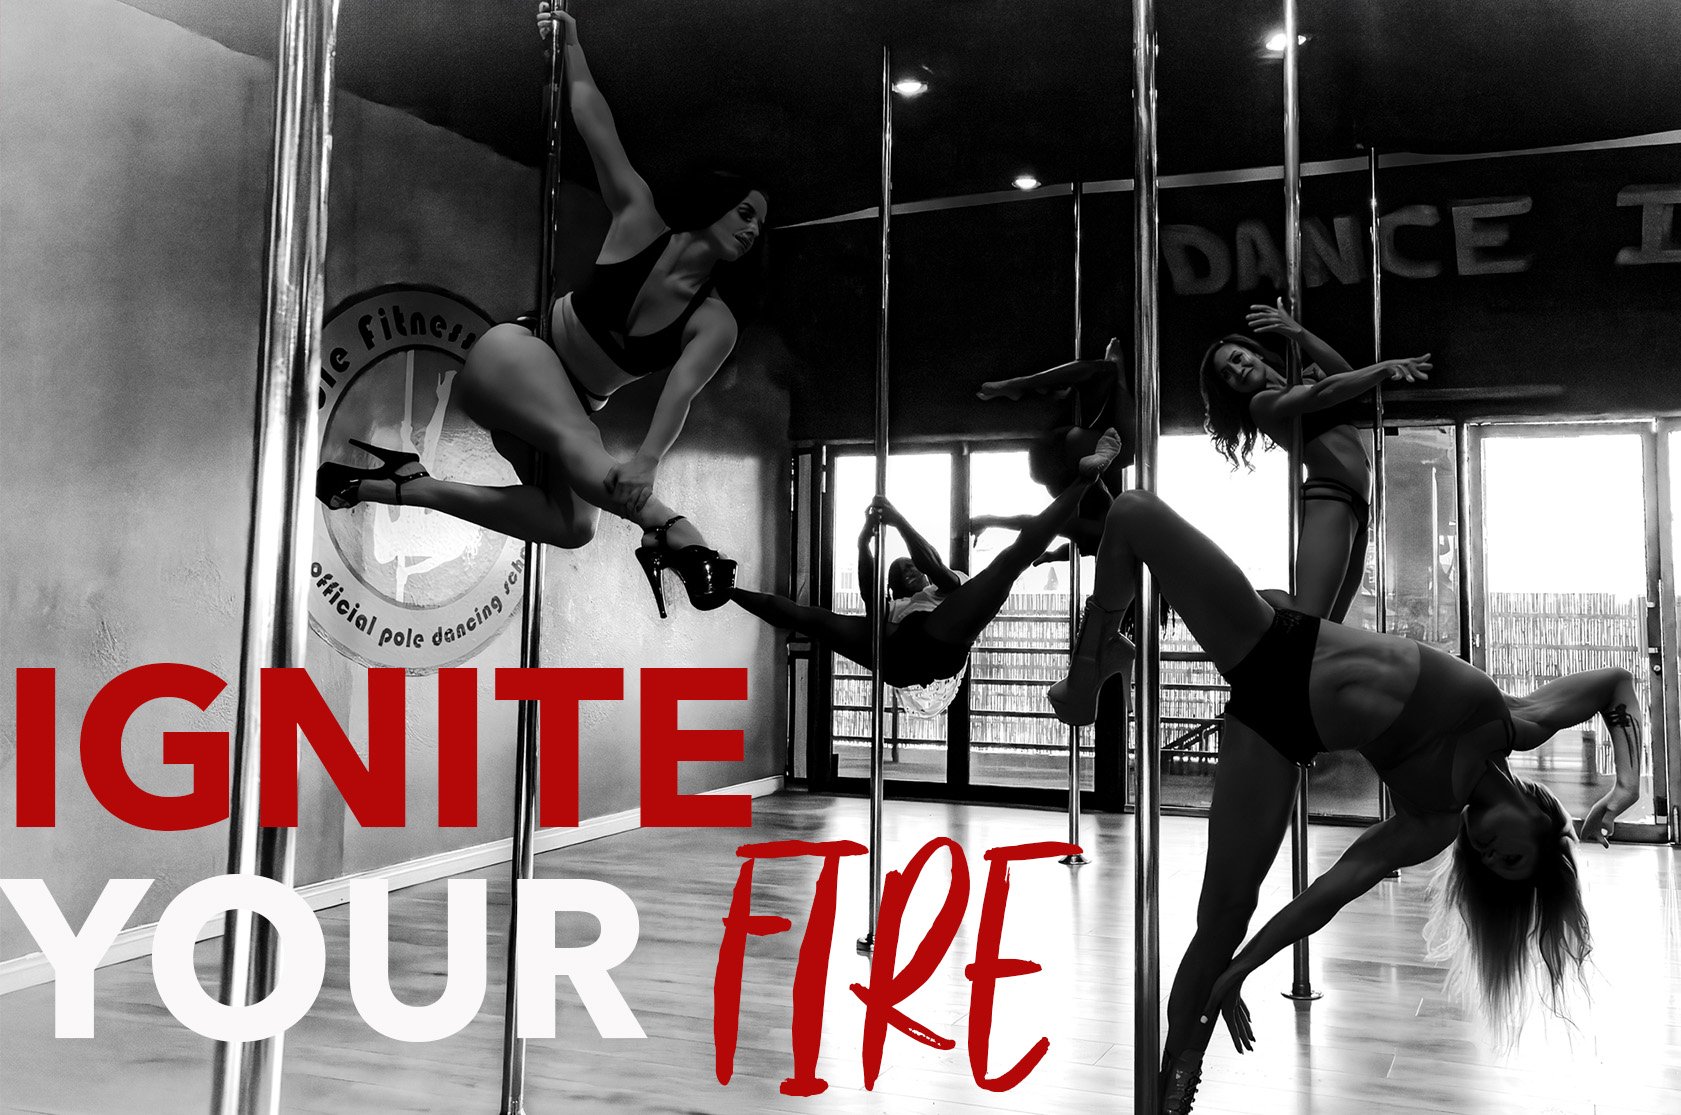 Home to the best pole dancing and aerial classes in Las Vegas. Host your pole  dancing bachelorette party here! We also offer exclusive online pole  dancing classes and are the preferred studio